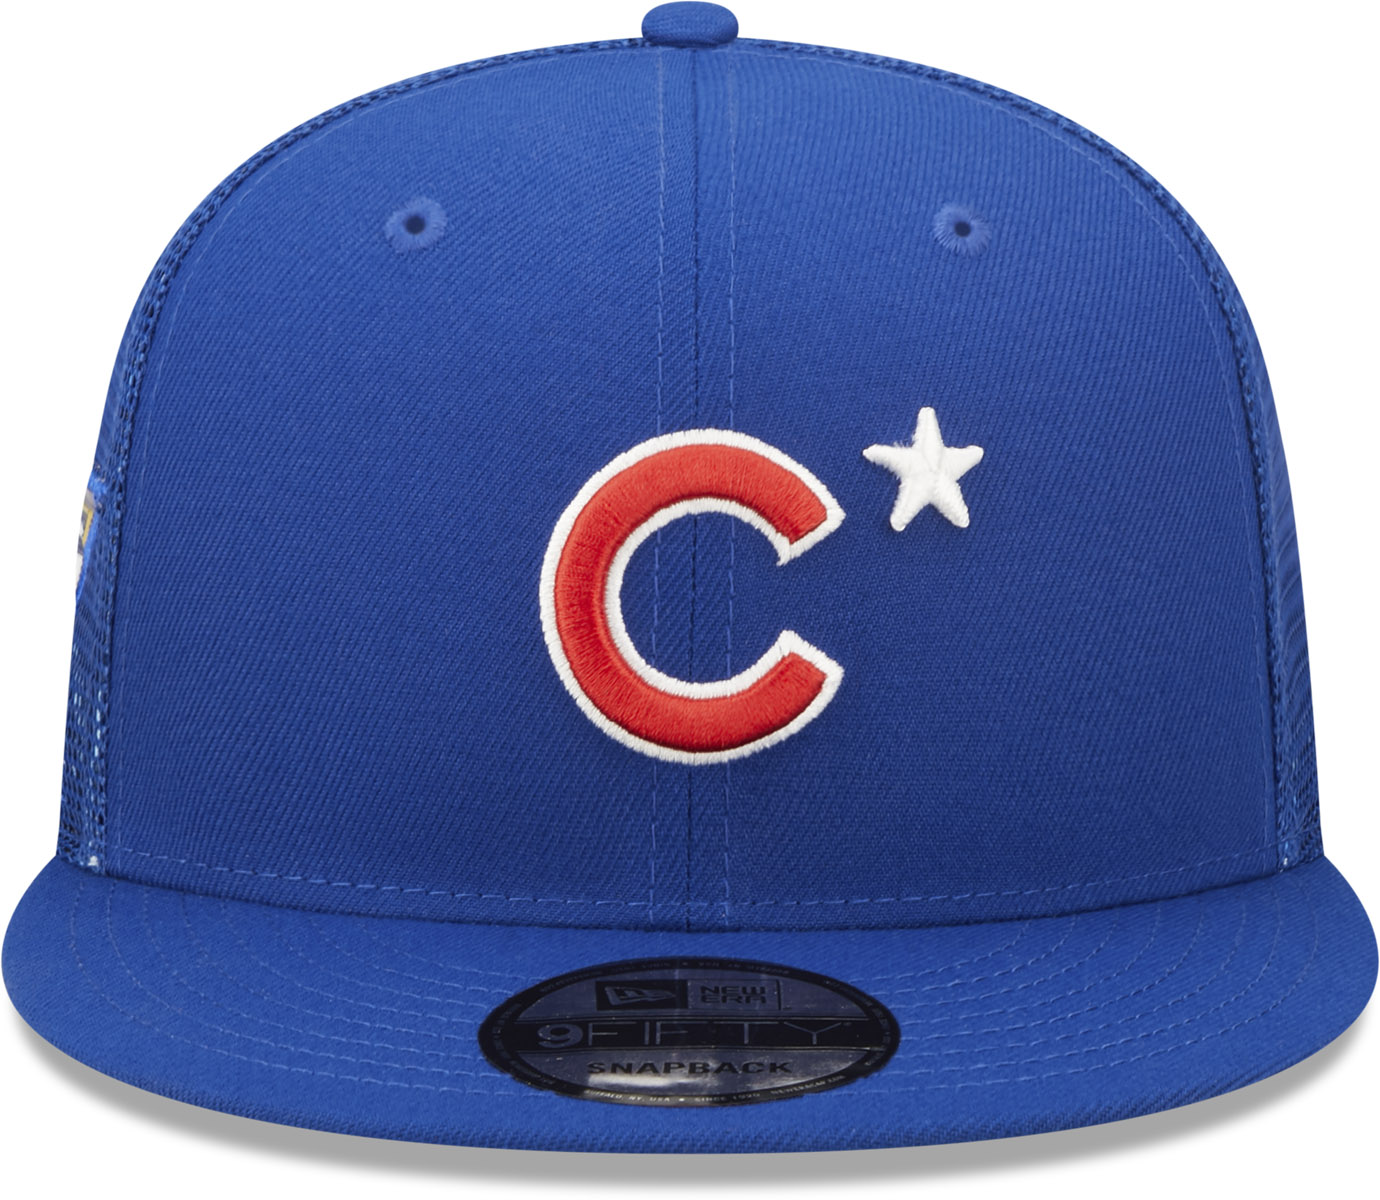 Chicago Cubs New Era Hats, Cubs 59FIFTY and 39THIRTY New Era Caps